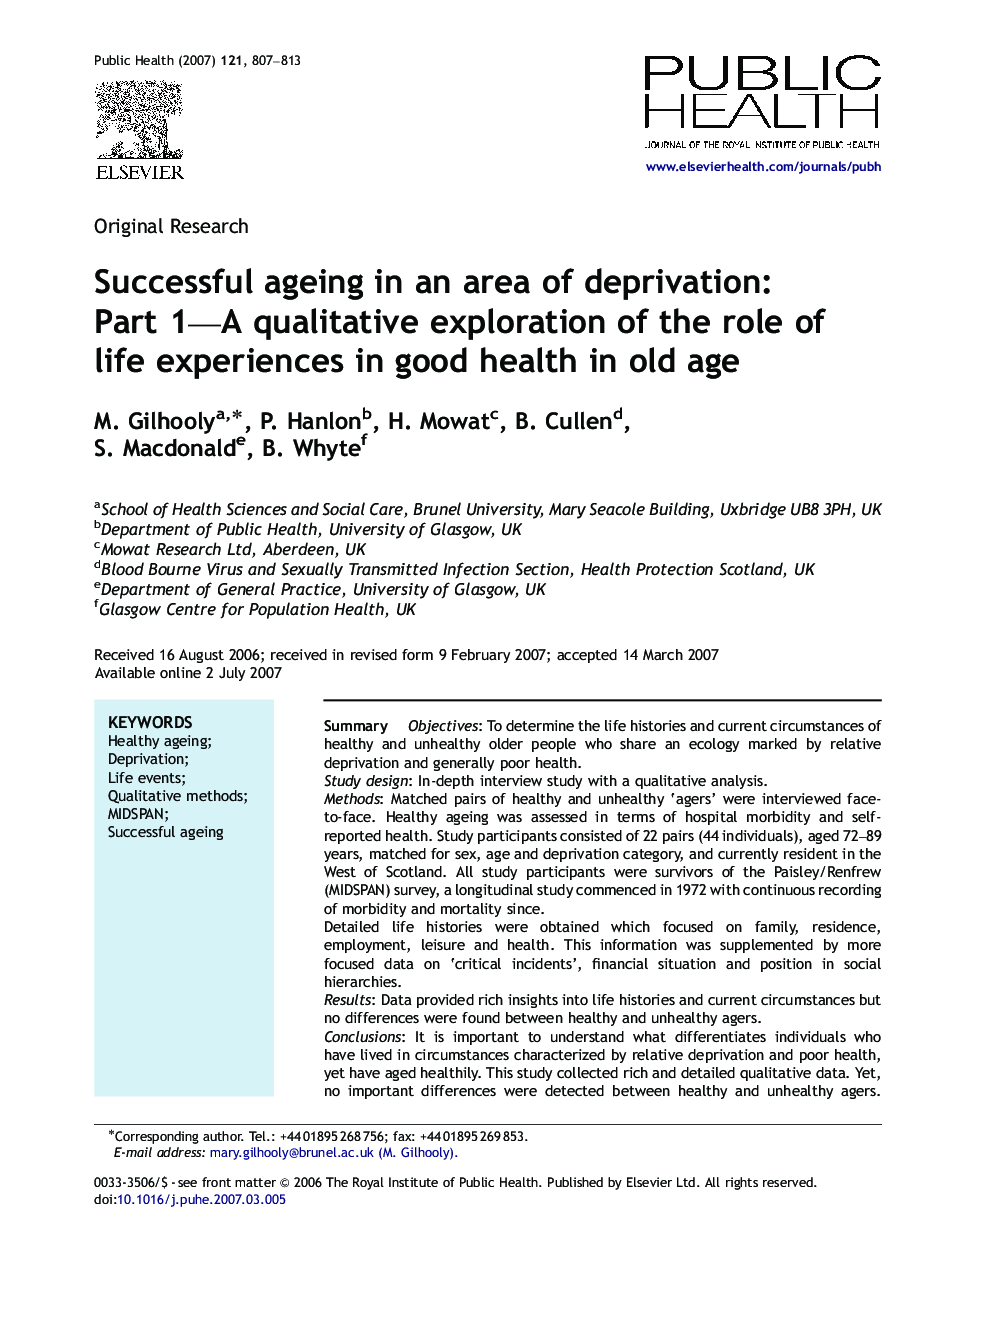 Successful ageing in an area of deprivation: Part 1—A qualitative exploration of the role of life experiences in good health in old age